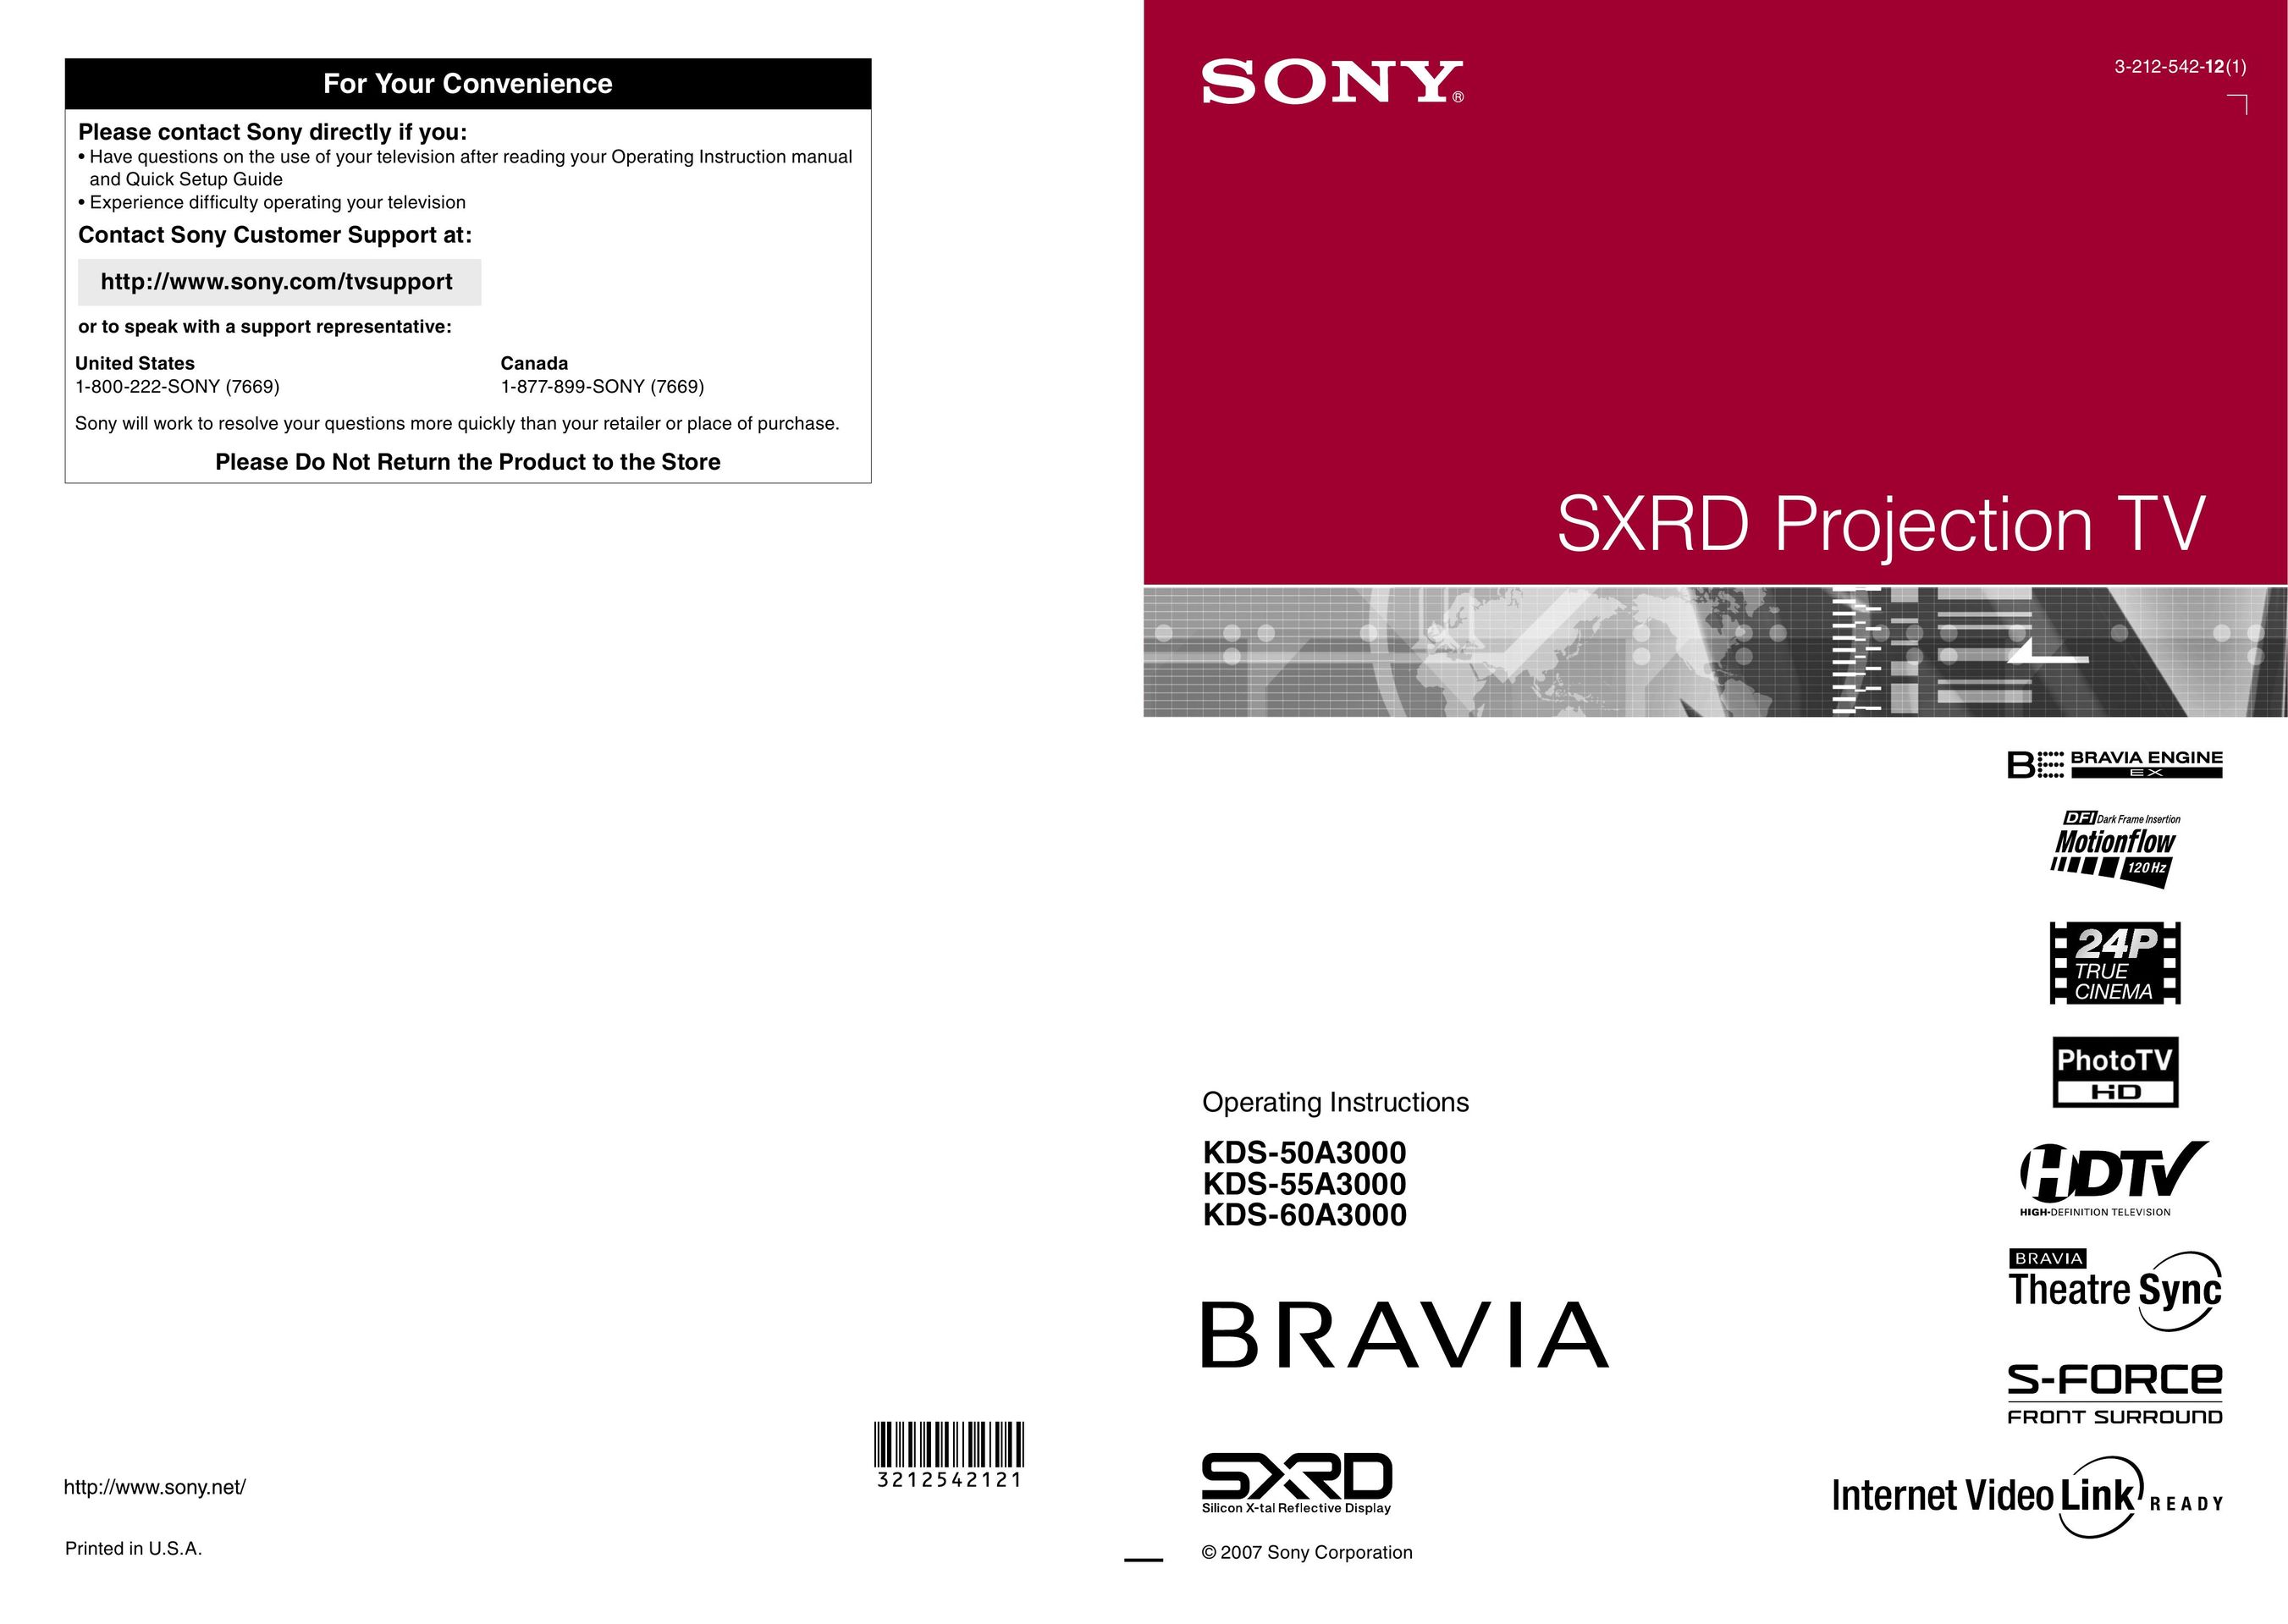 Sony KDS-60A3000, KDS-50A3000, KDS-55A3000 Projection Television User Manual